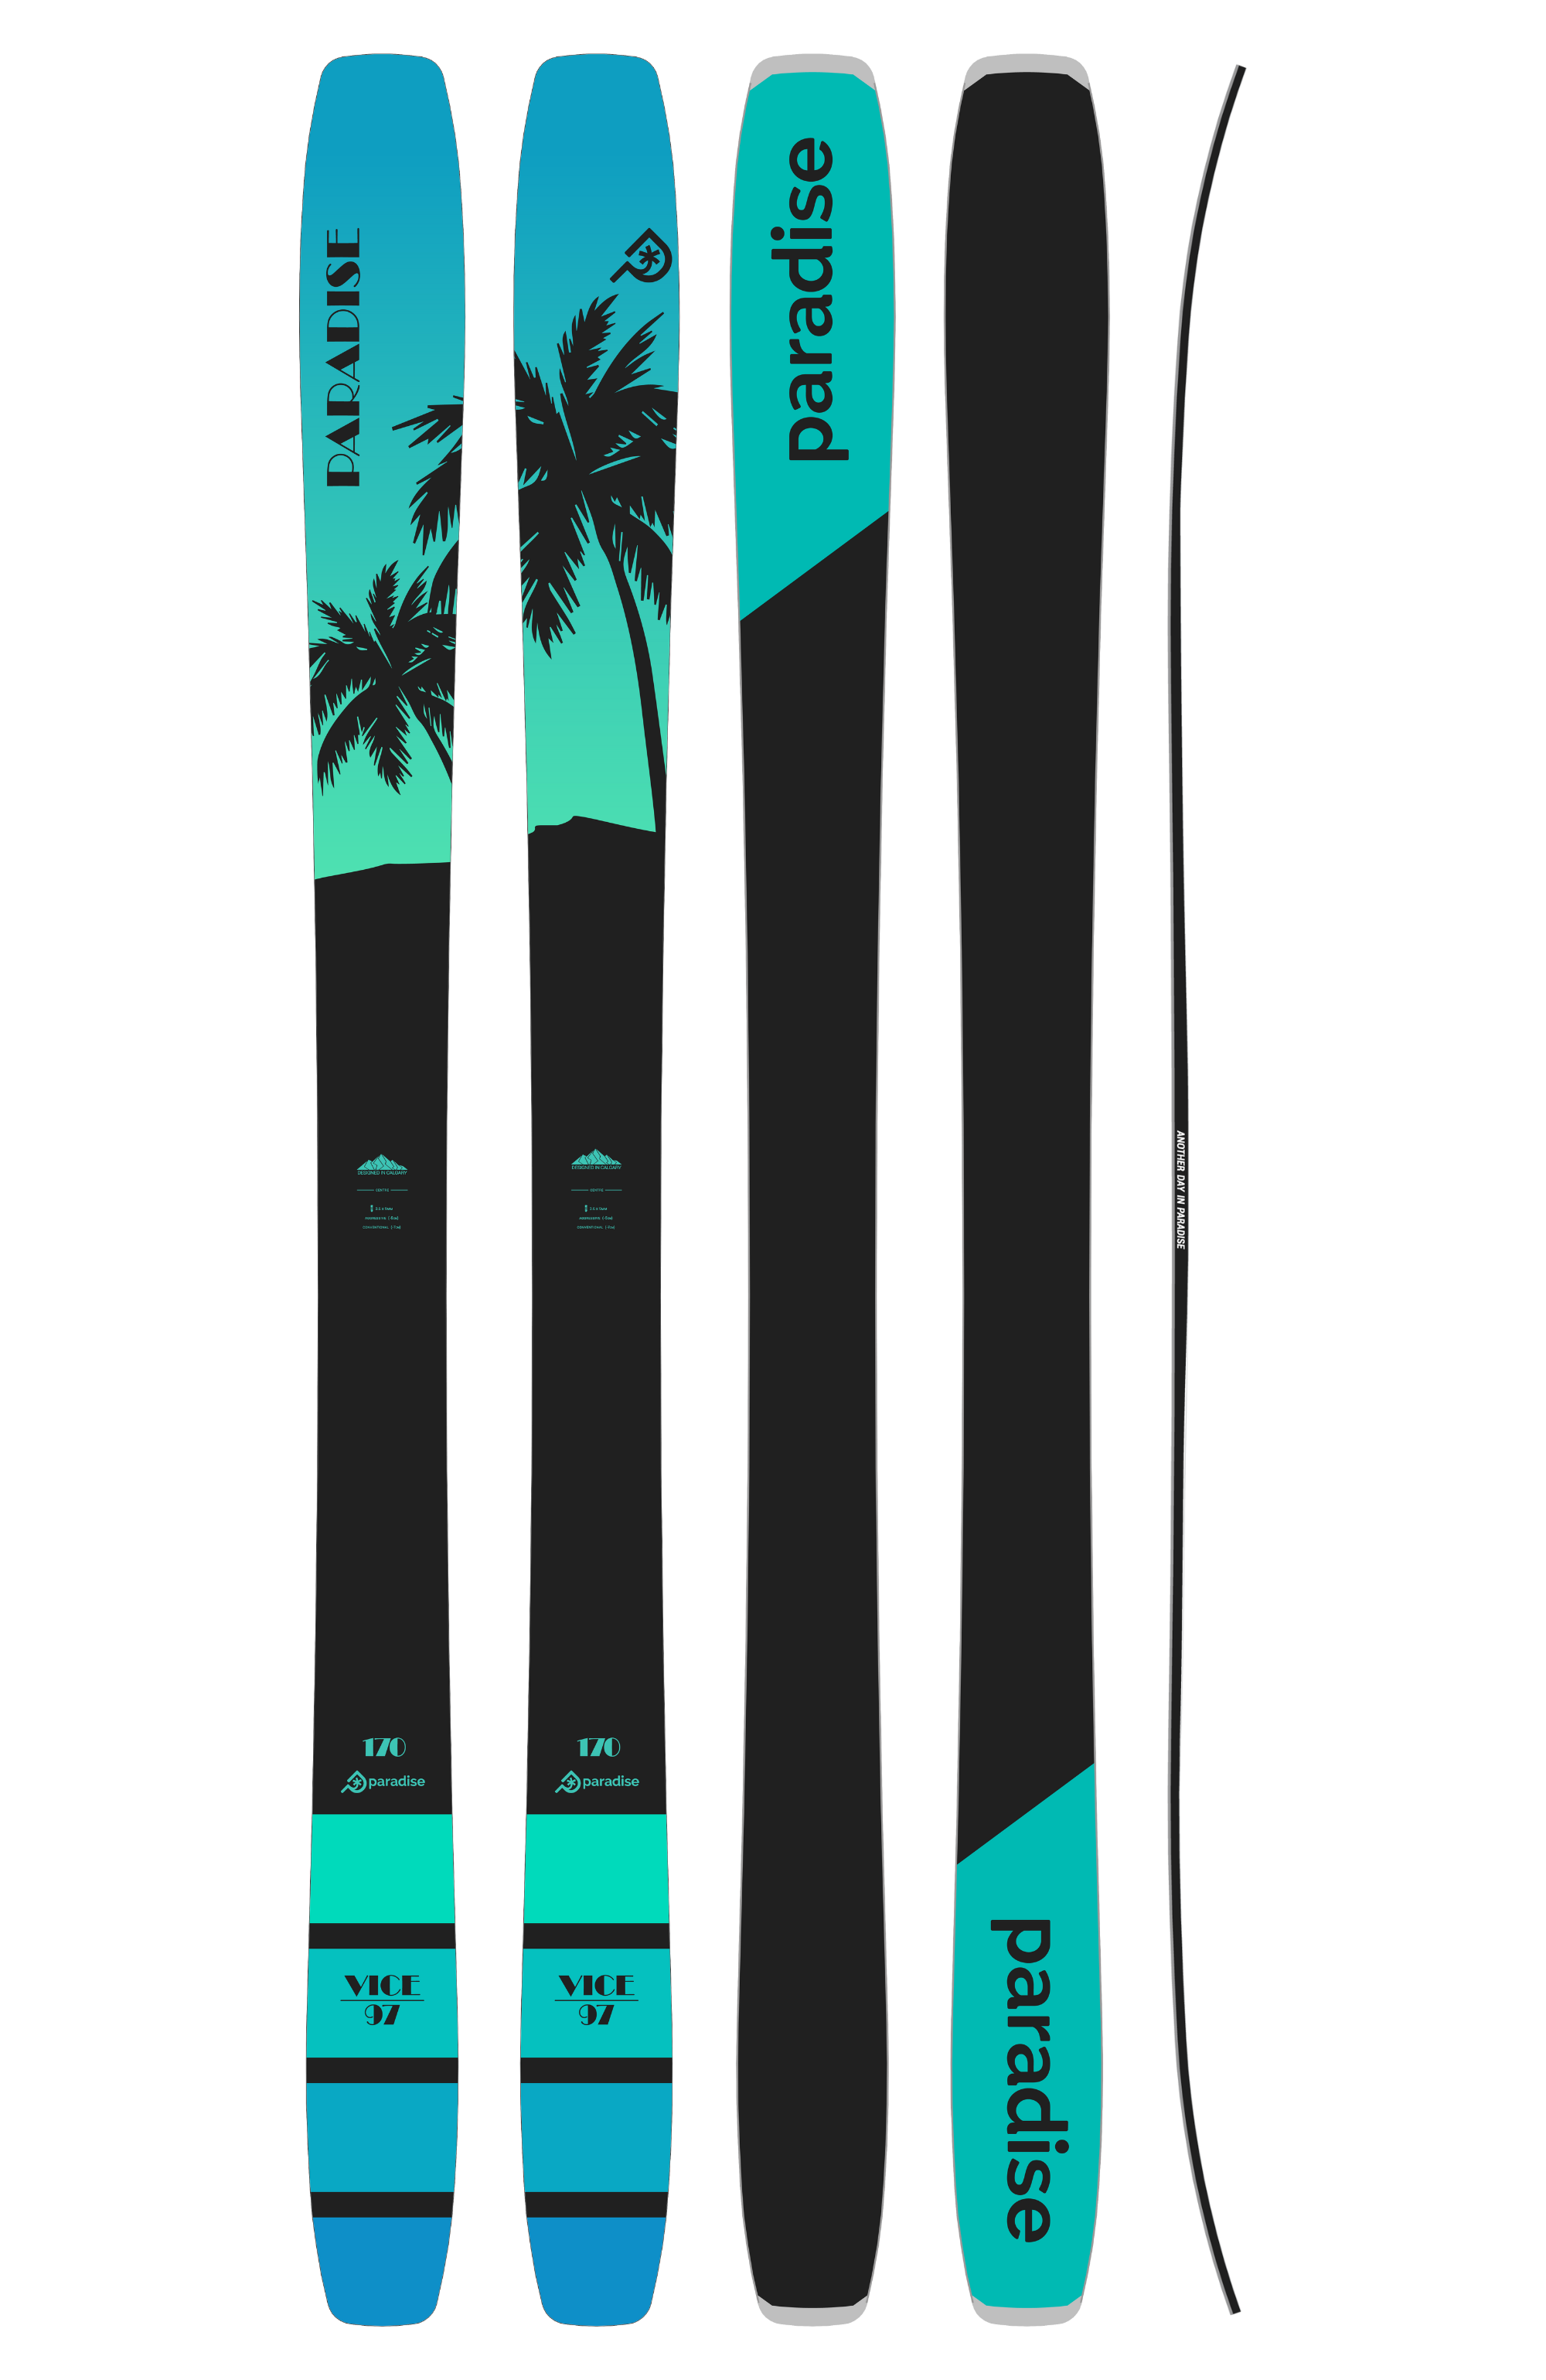 The unisex VICE 97 freestyle ski. Showing the anti ice/scratch top sheet, sintered base, and rocker-camber-rocker profile with sidewall writing.